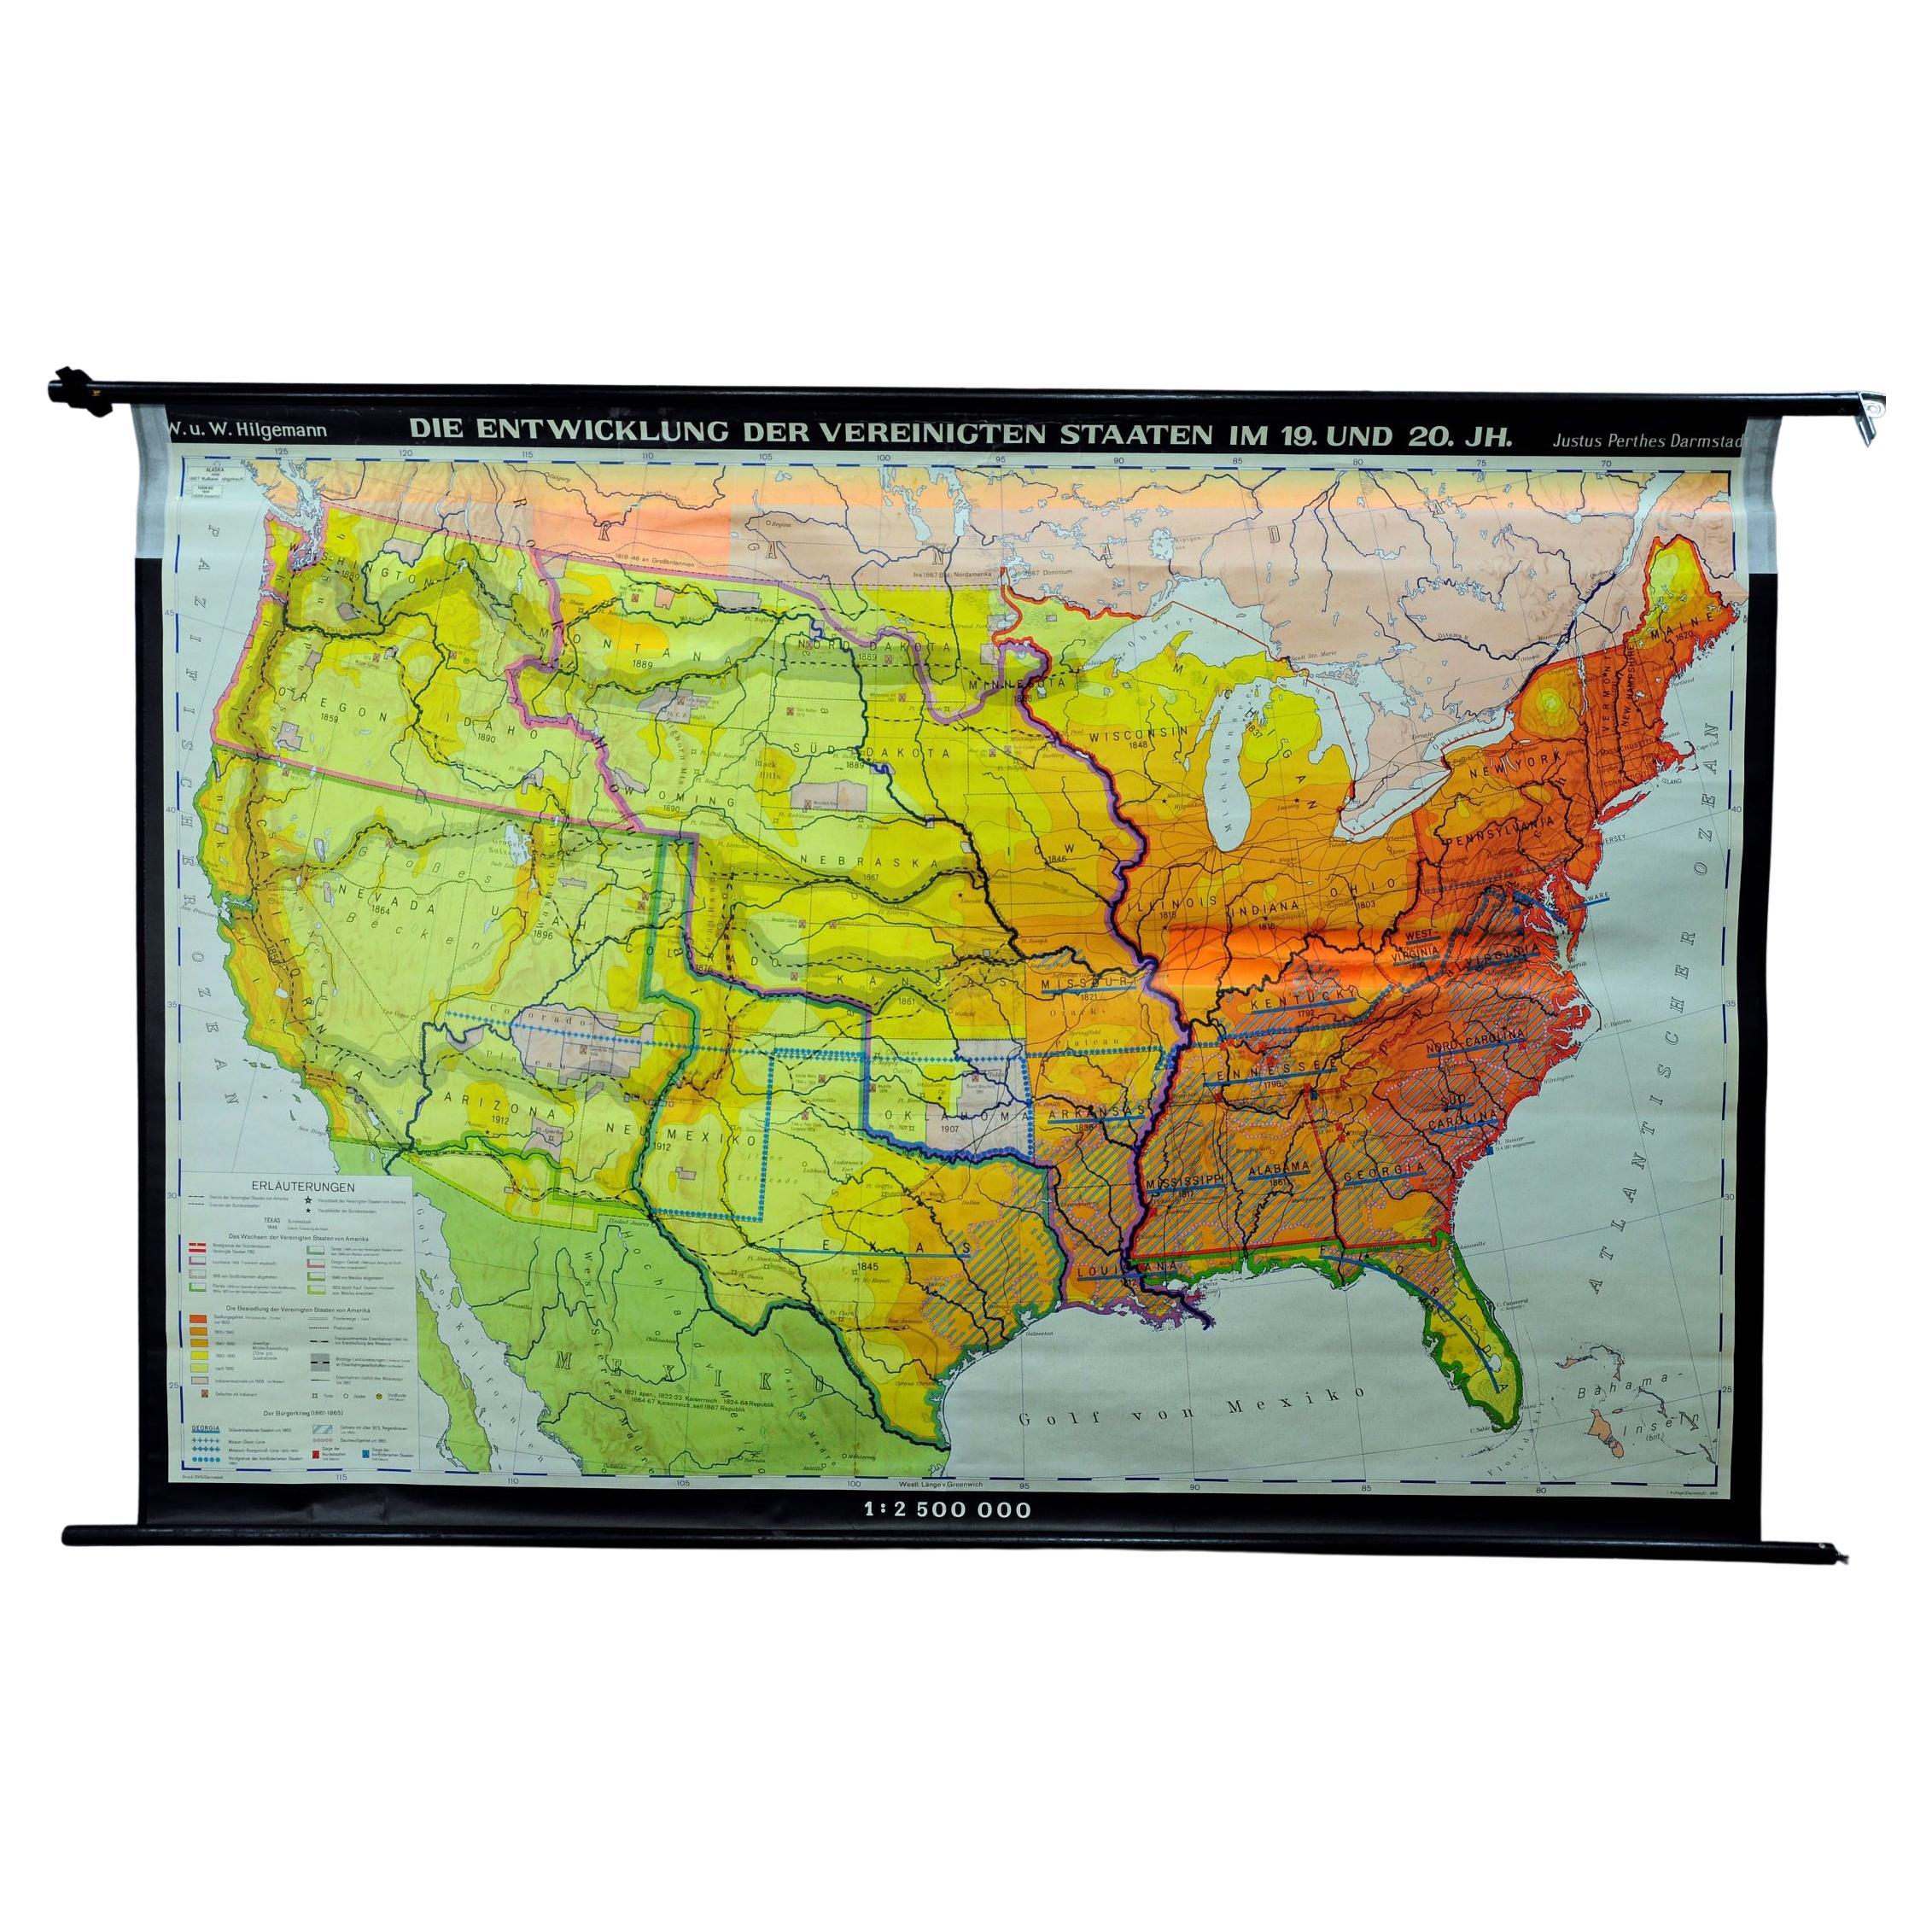 Vintage Mural Map United States Development in the 19th and 20th centuries